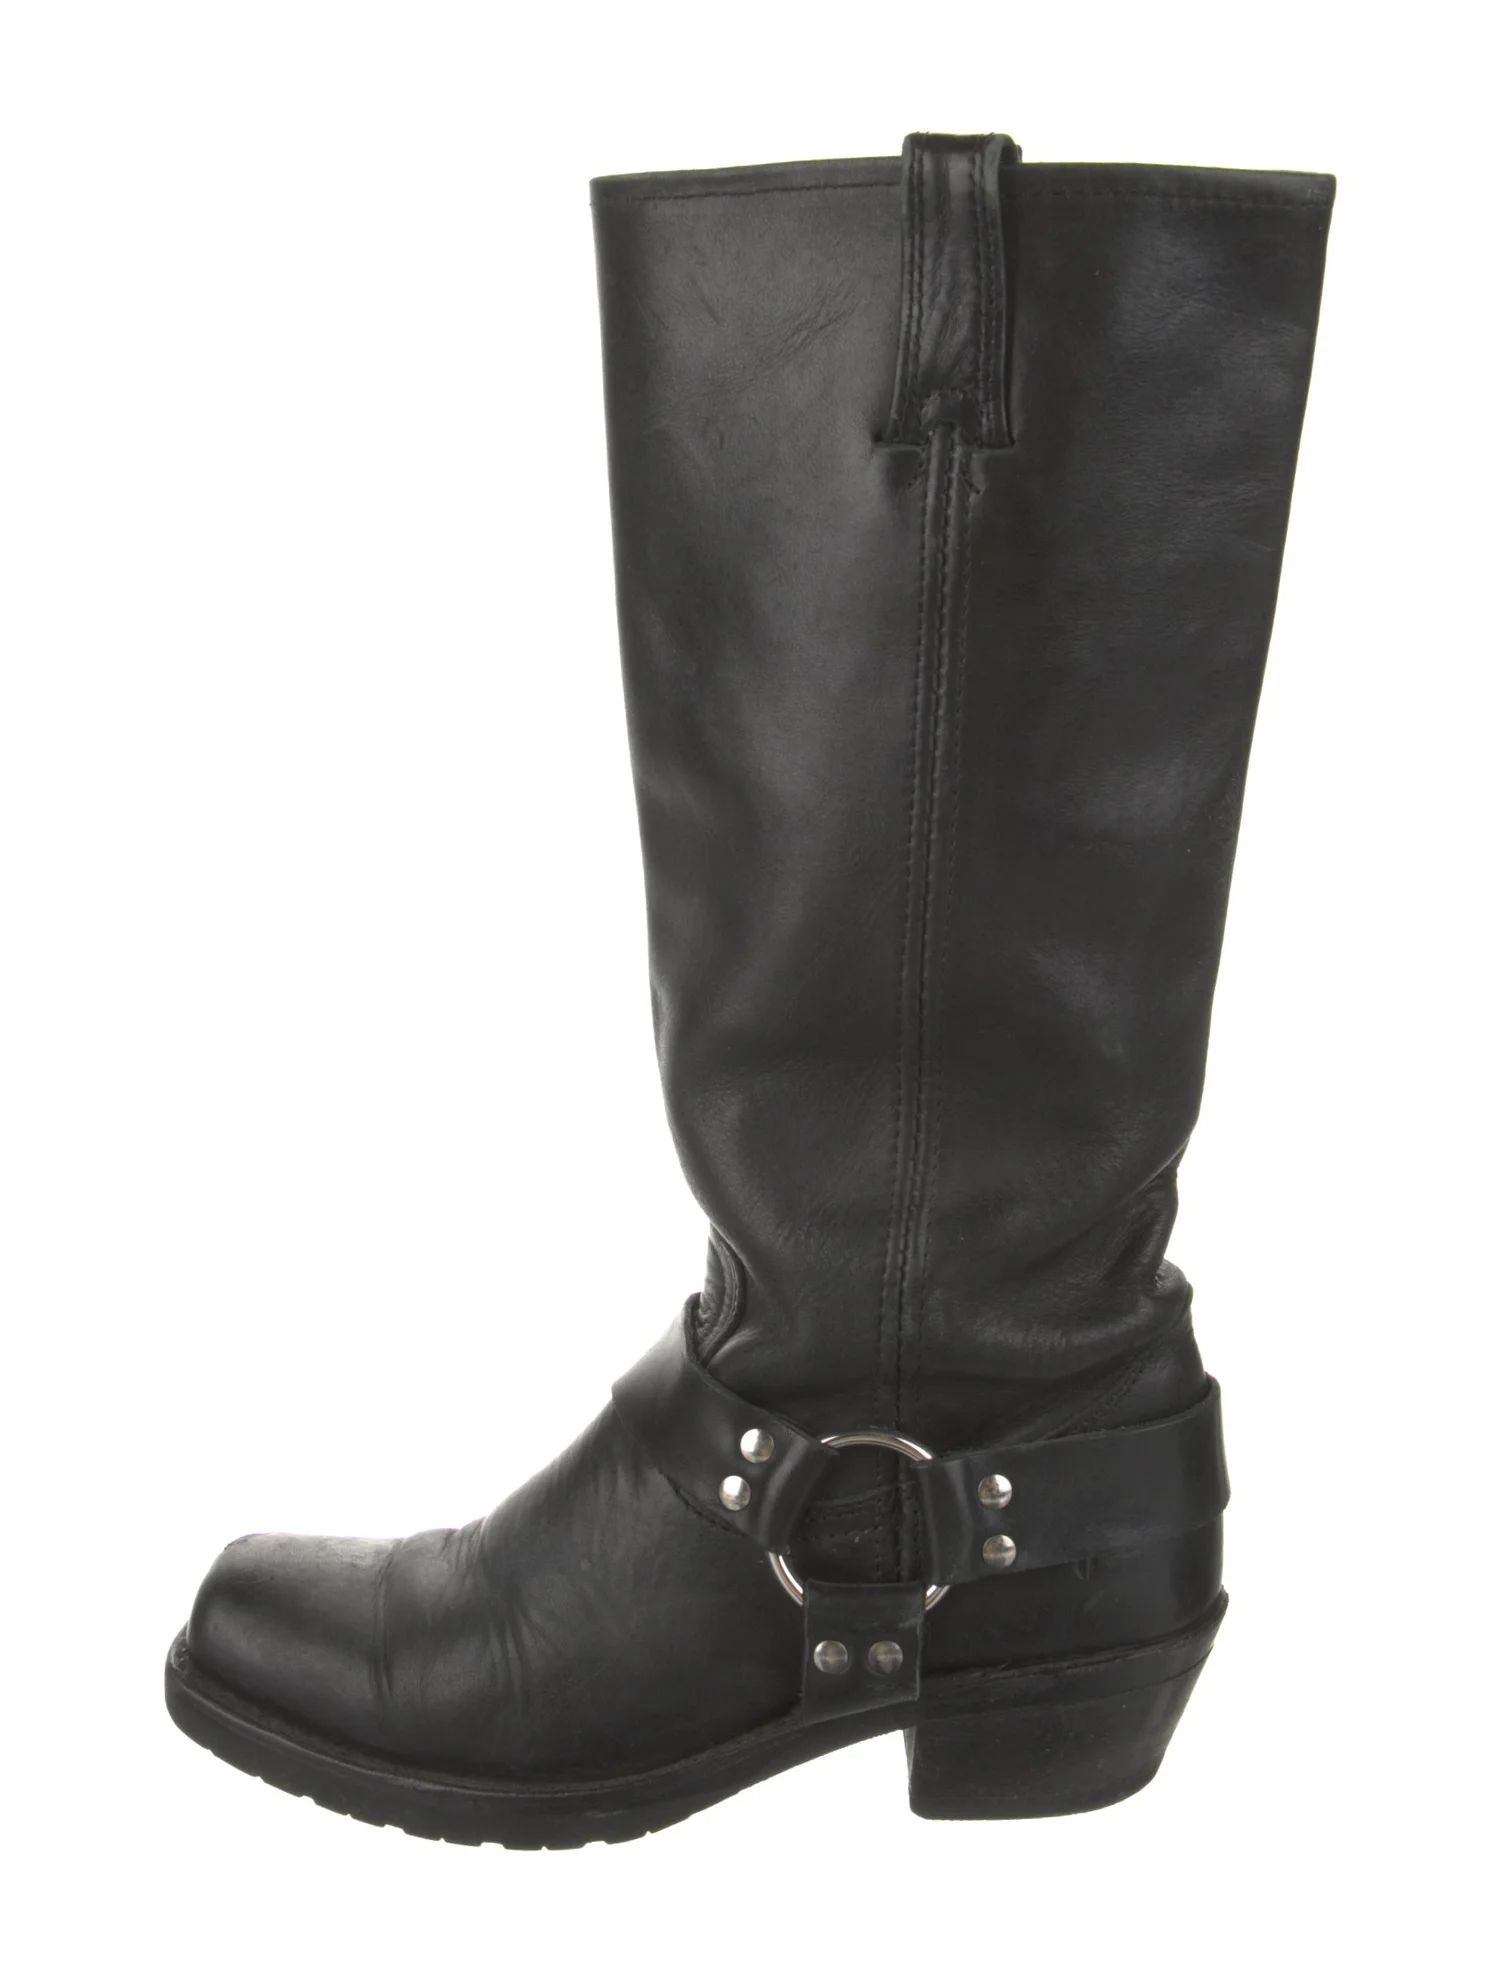 Leather Riding Boots | The RealReal